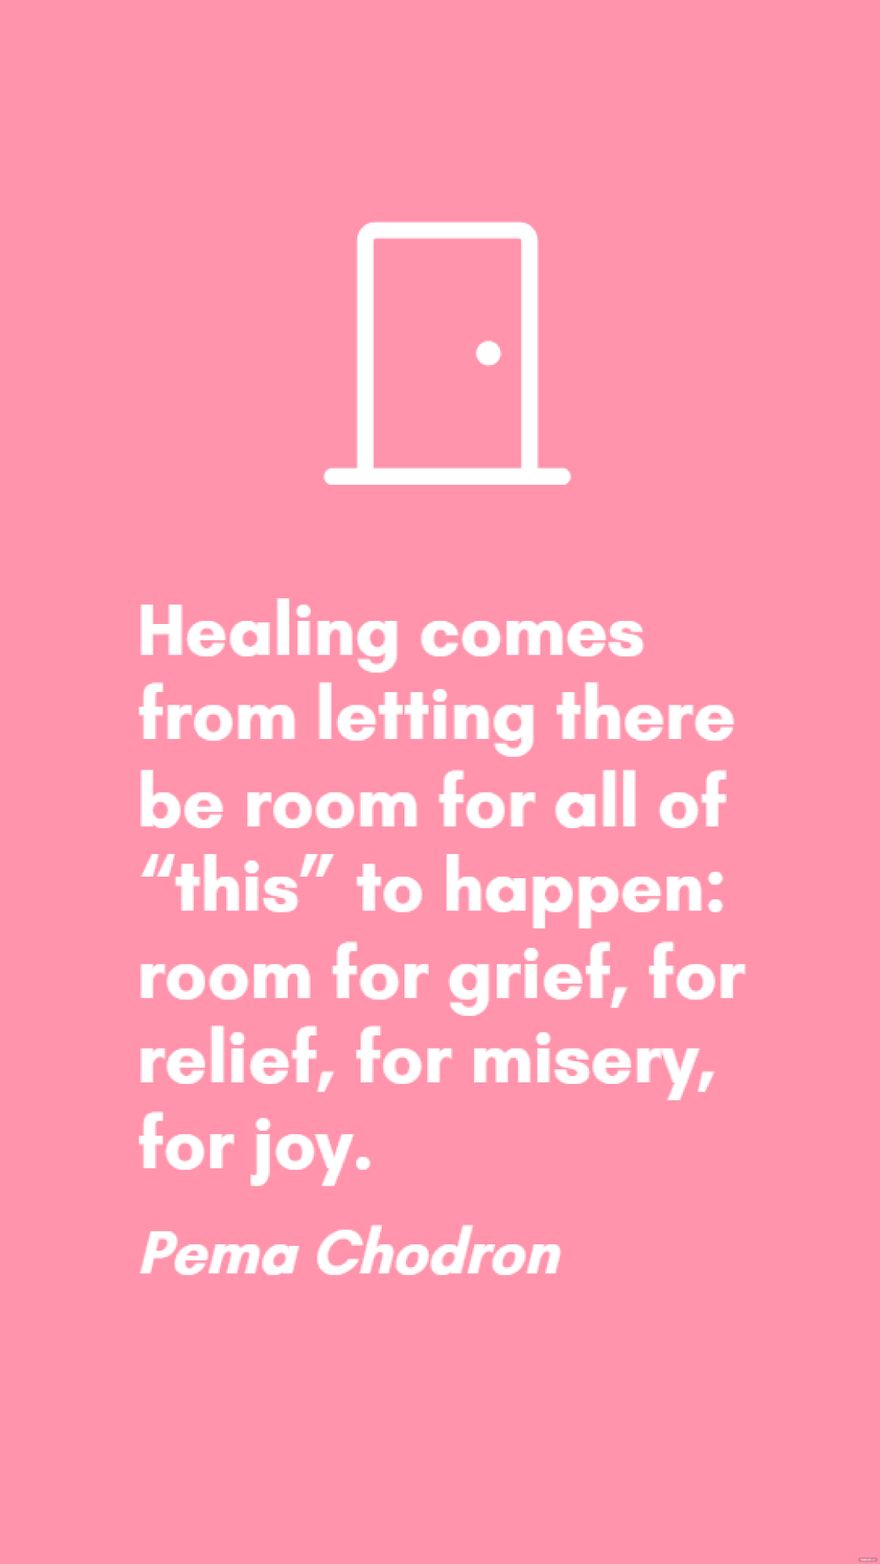 Pema Chodron - Healing comes from letting there be room for all of “this” to happen: room for grief, for relief, for misery, for joy. in JPG